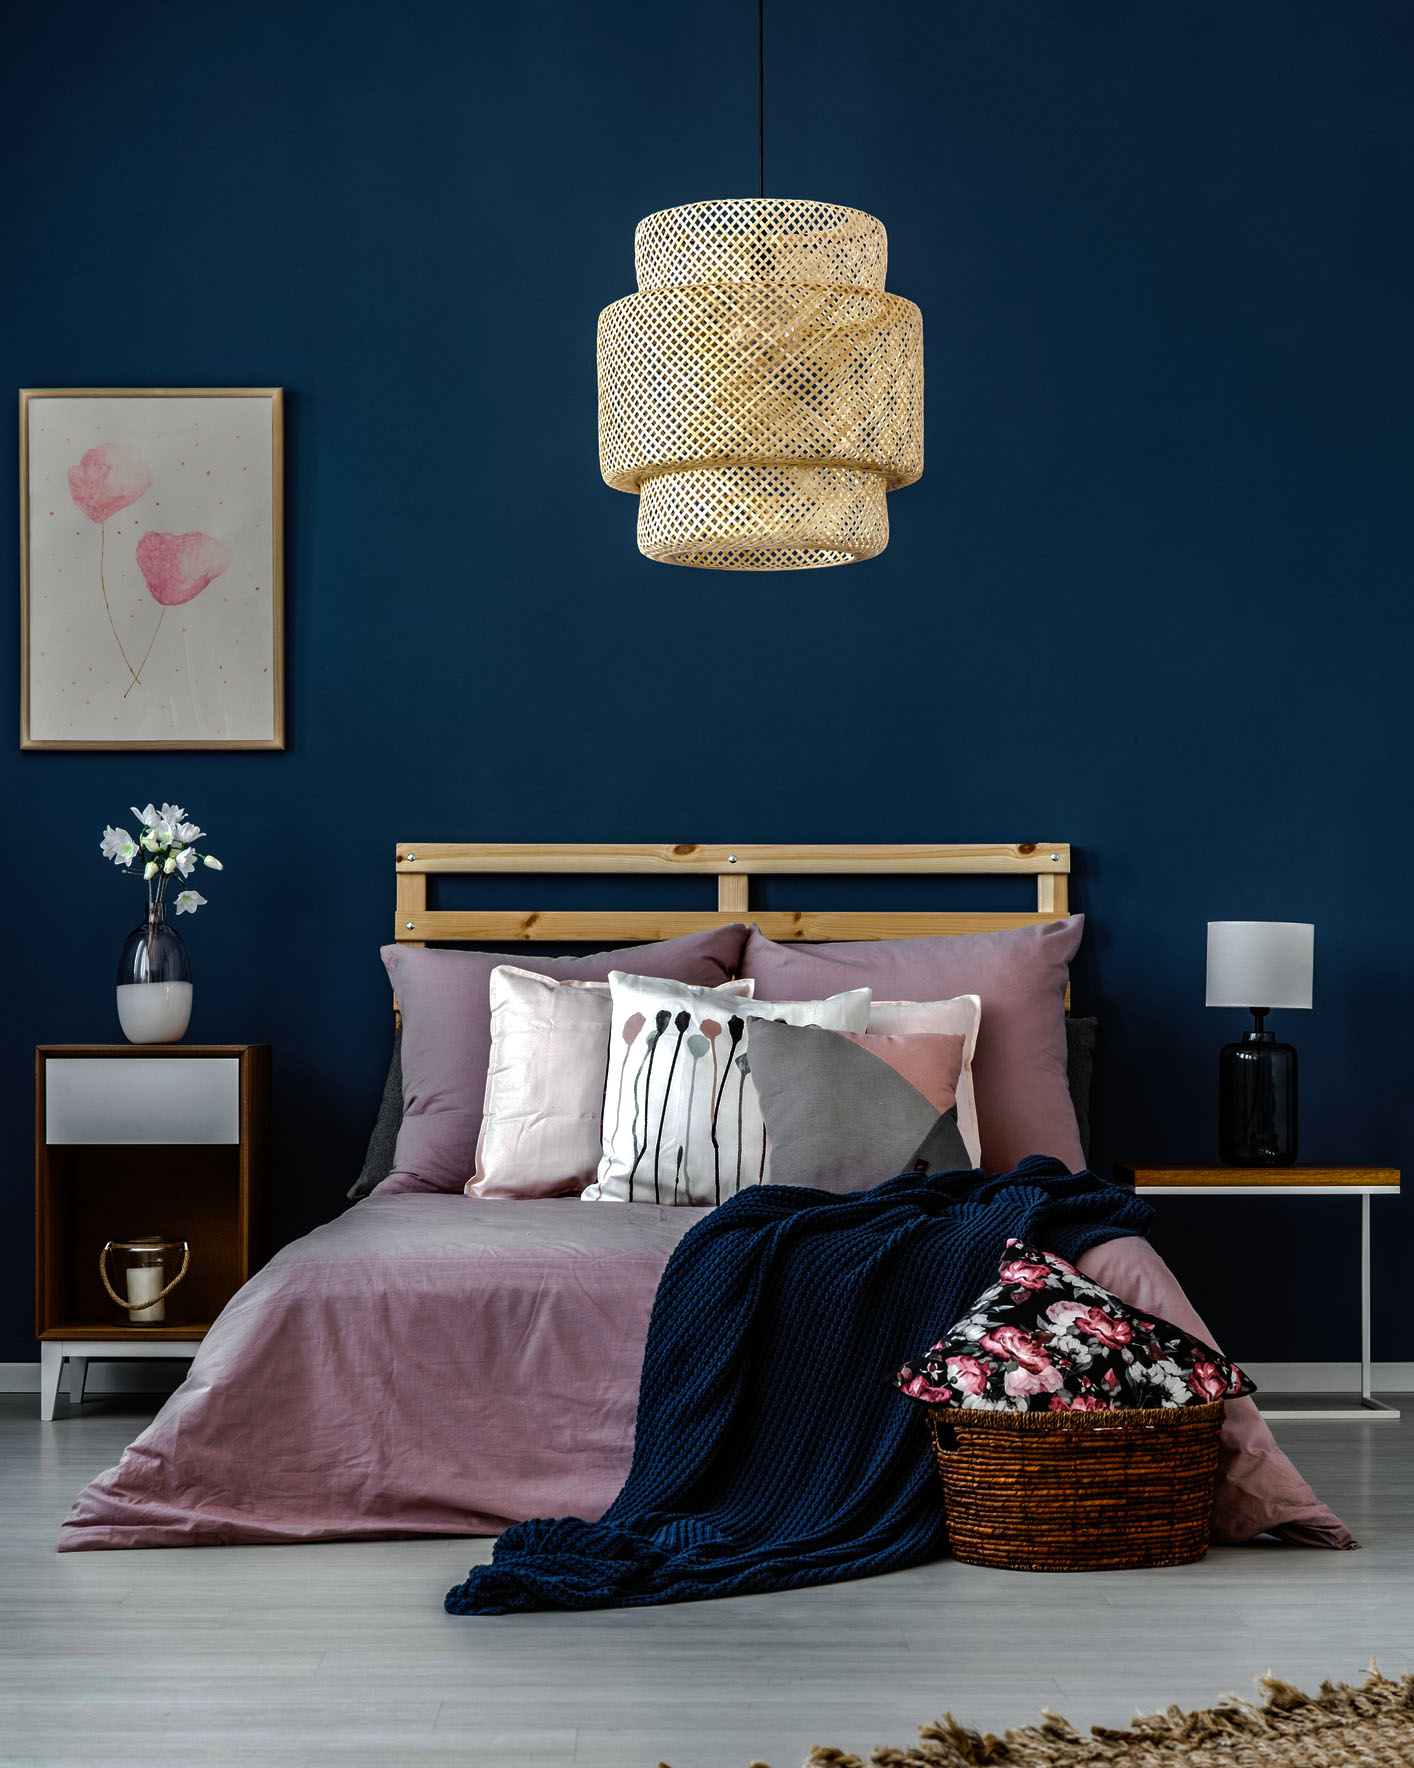 Designed lamp above king-size bed with dark blue blanket and pastel pillows in room with blue wall